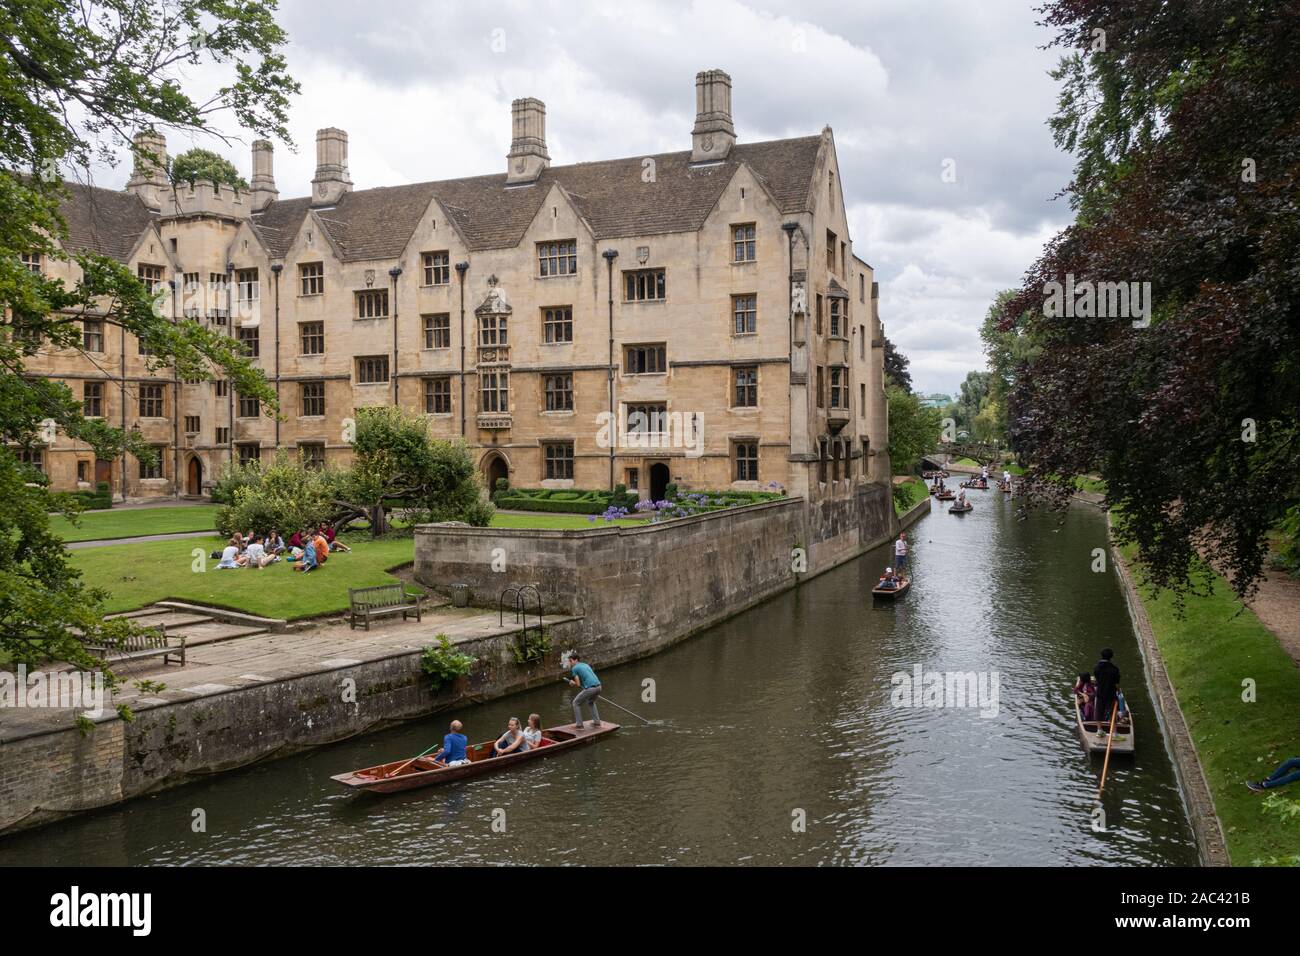 CAMBRIDGE,UK - AUGUST 4,2017: The typical boats (Punting) on the river Cam Stock Photo